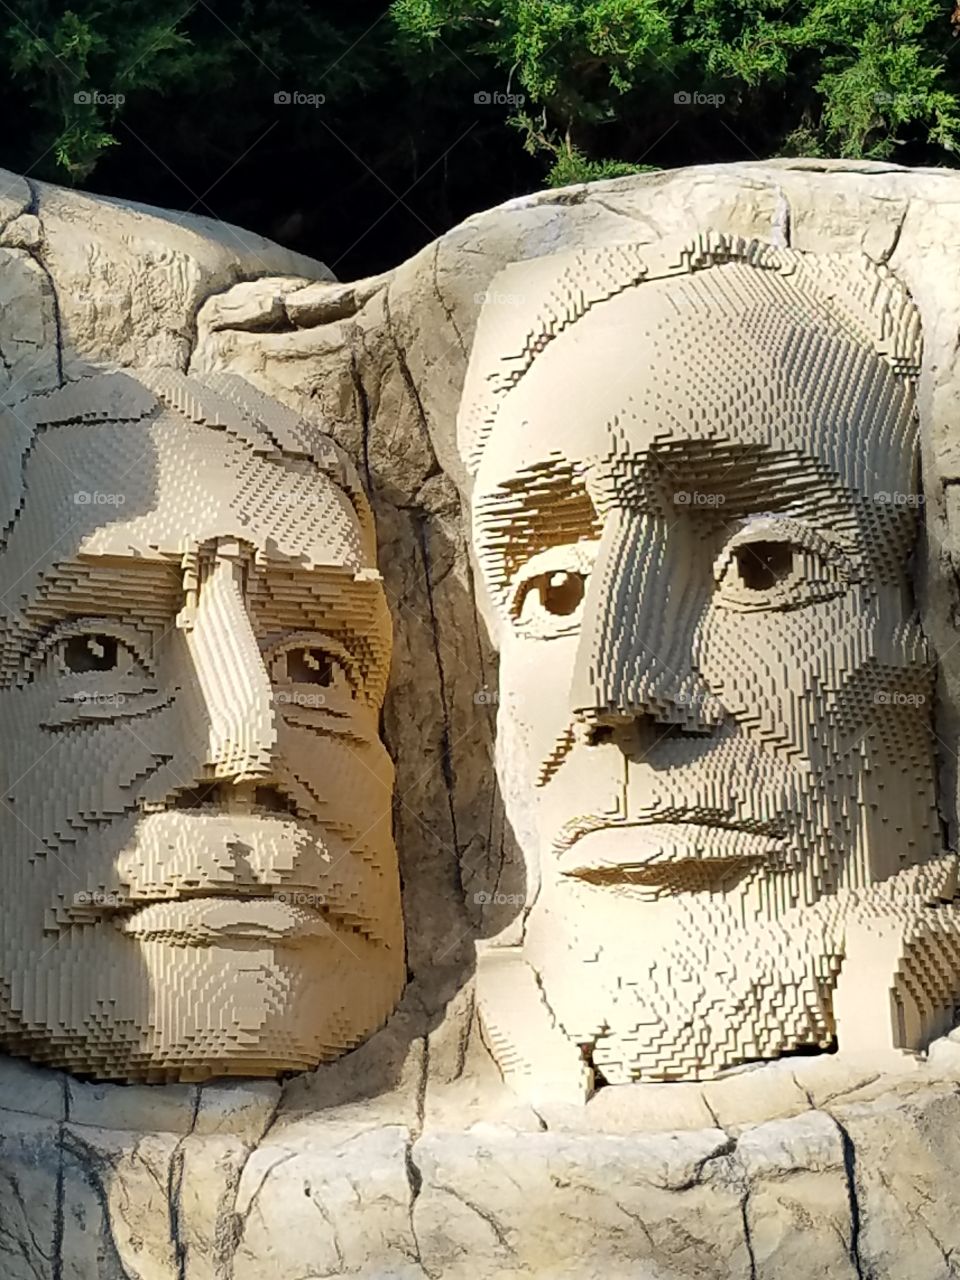 Lego Sculptures of US Presidents